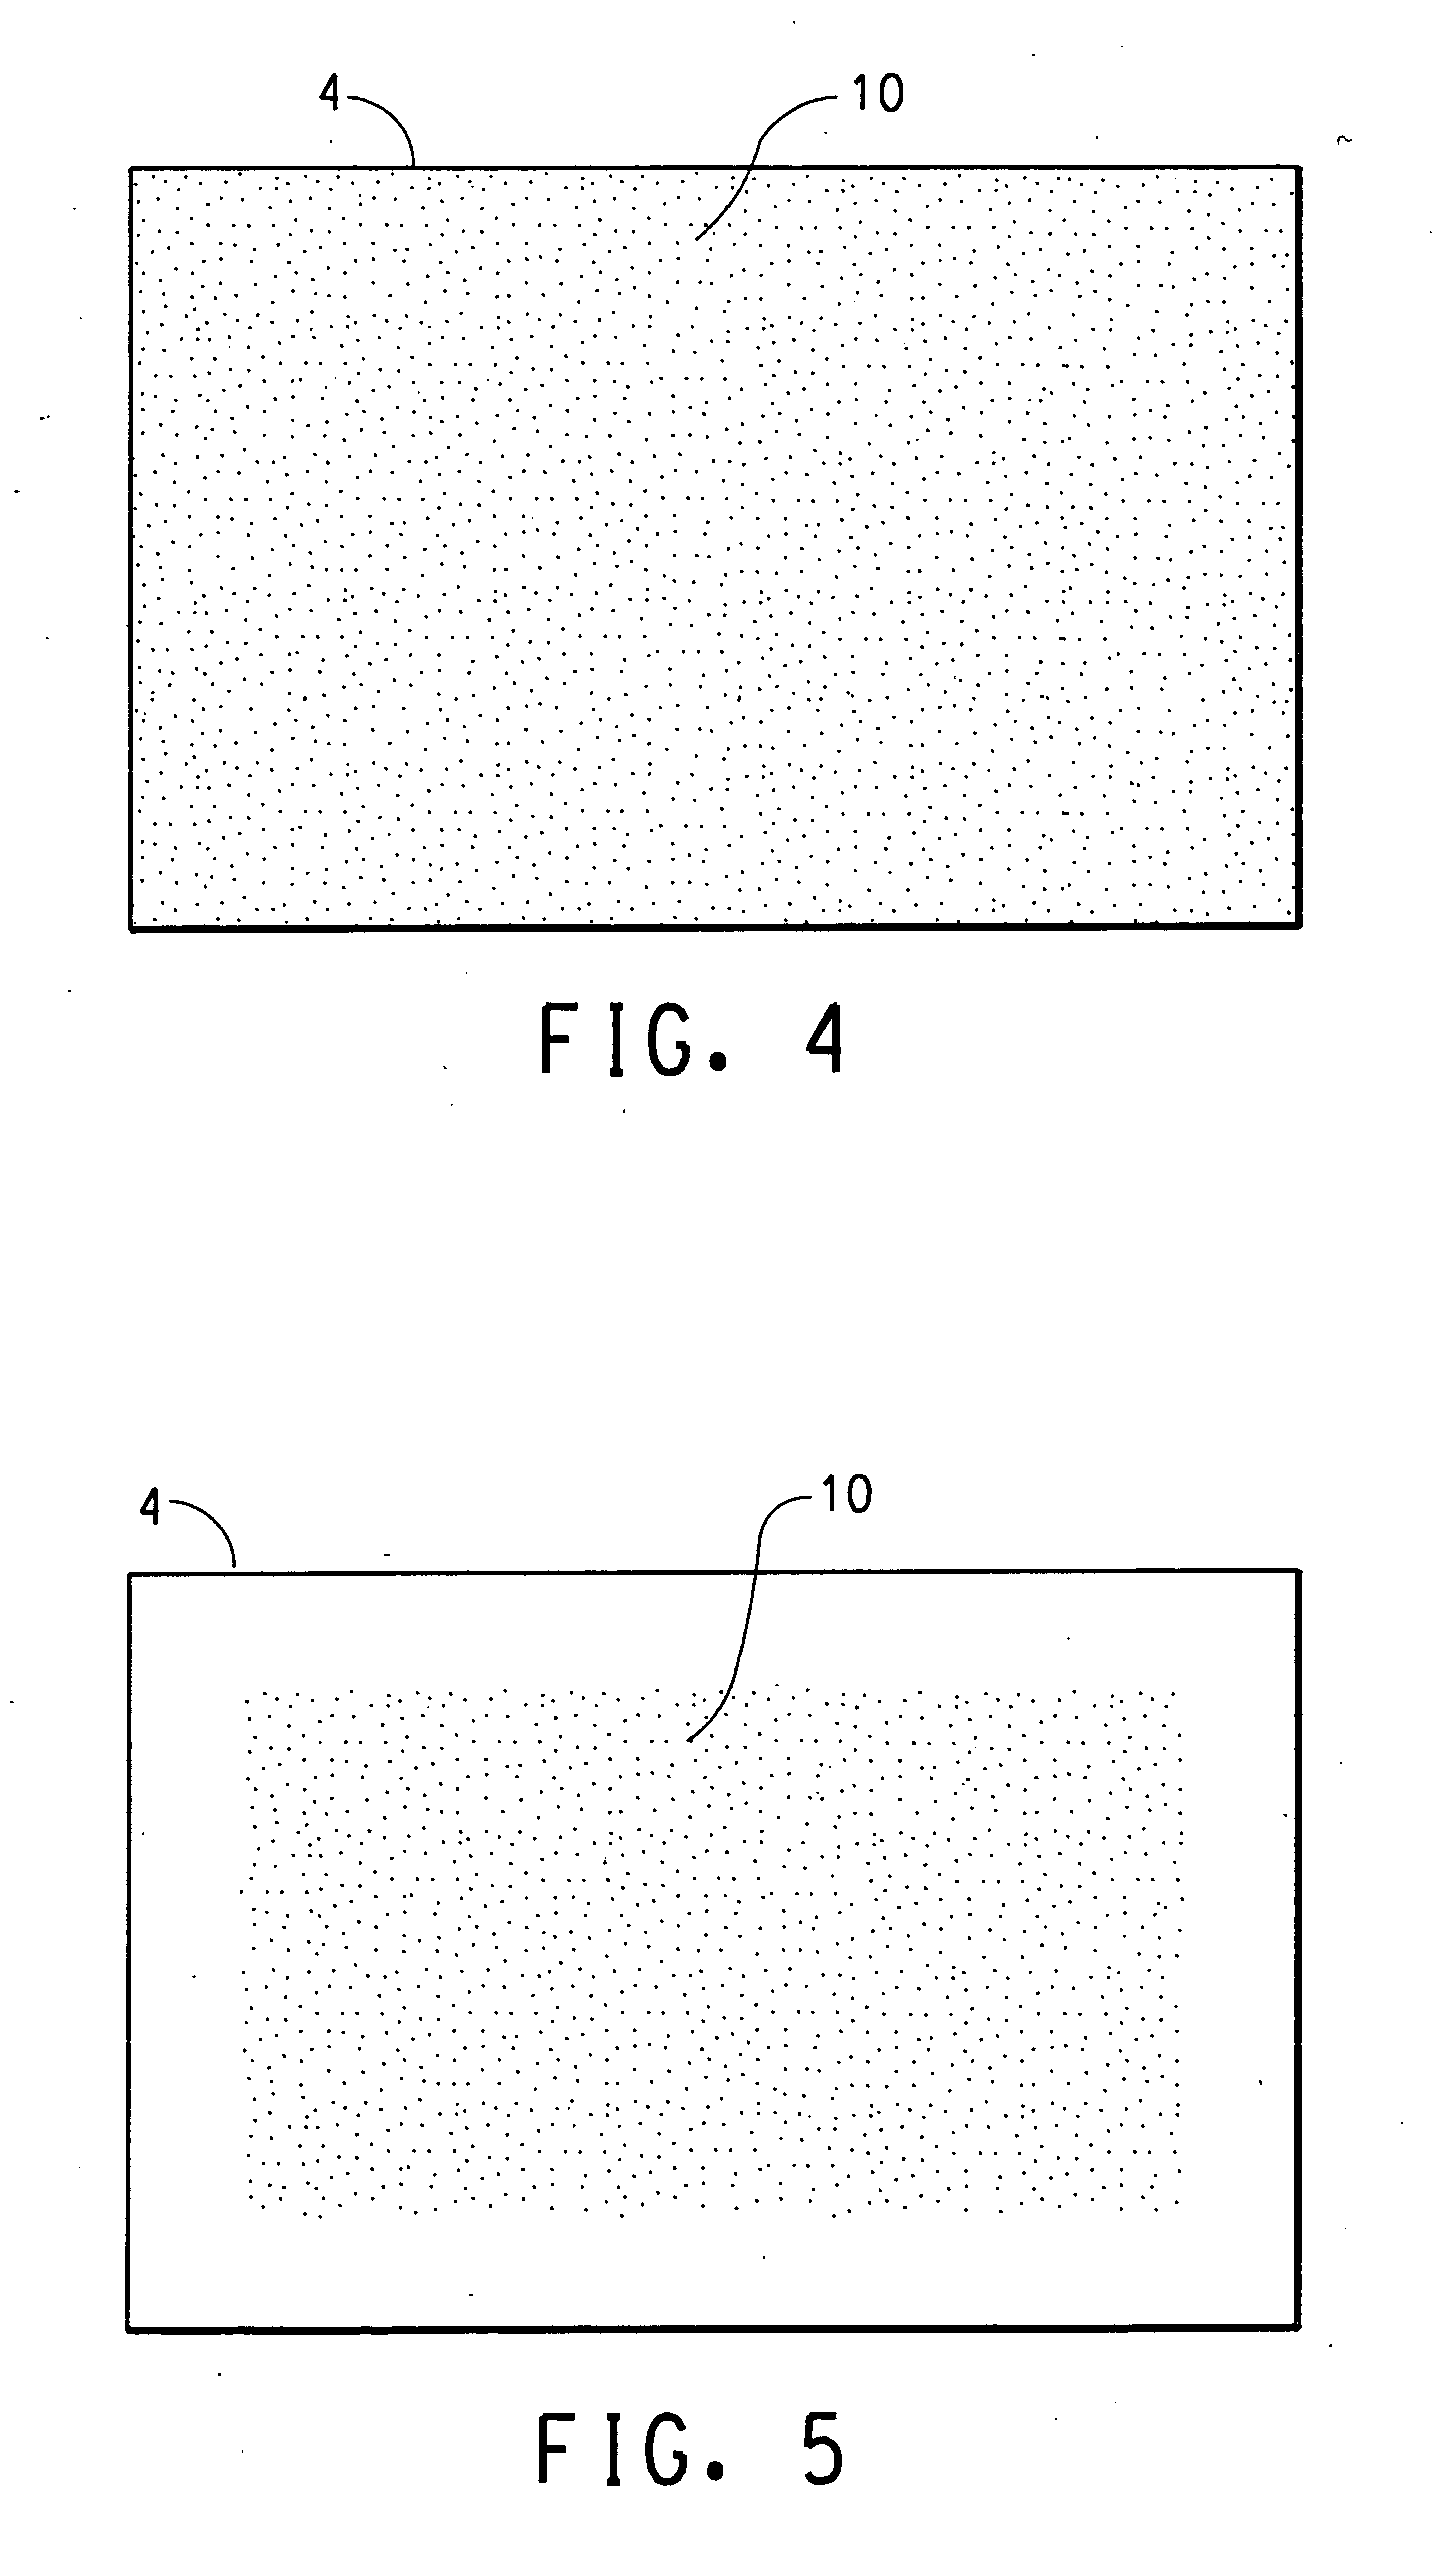 Electronic devices and a method for encapsulating electronic devices